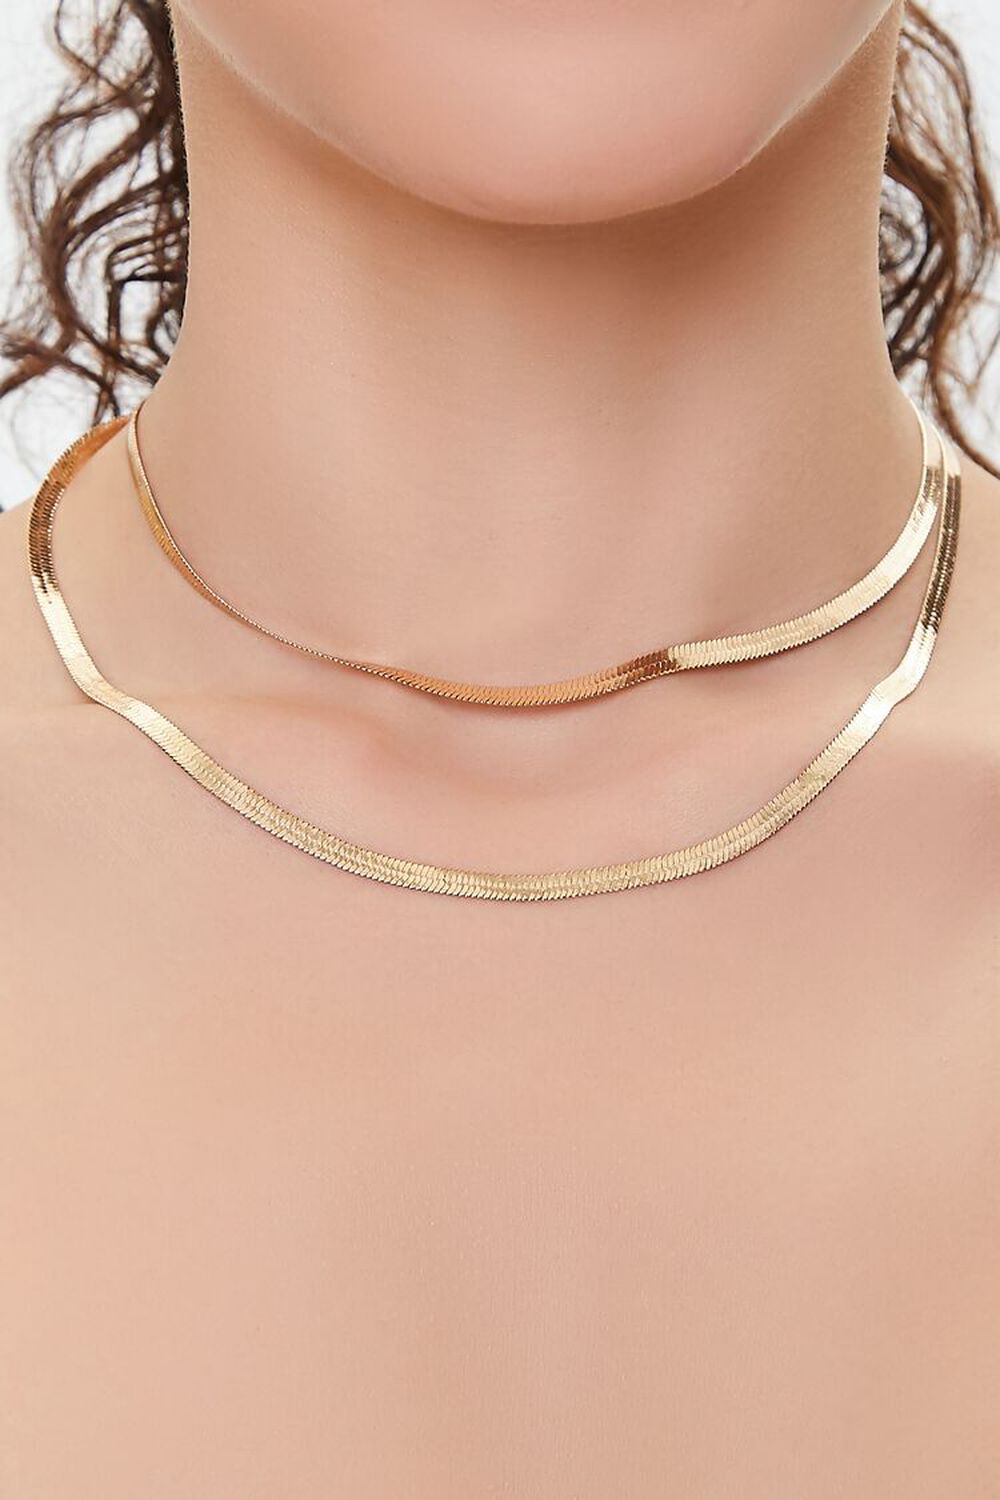 Layered Snake Chain Necklace, image 1